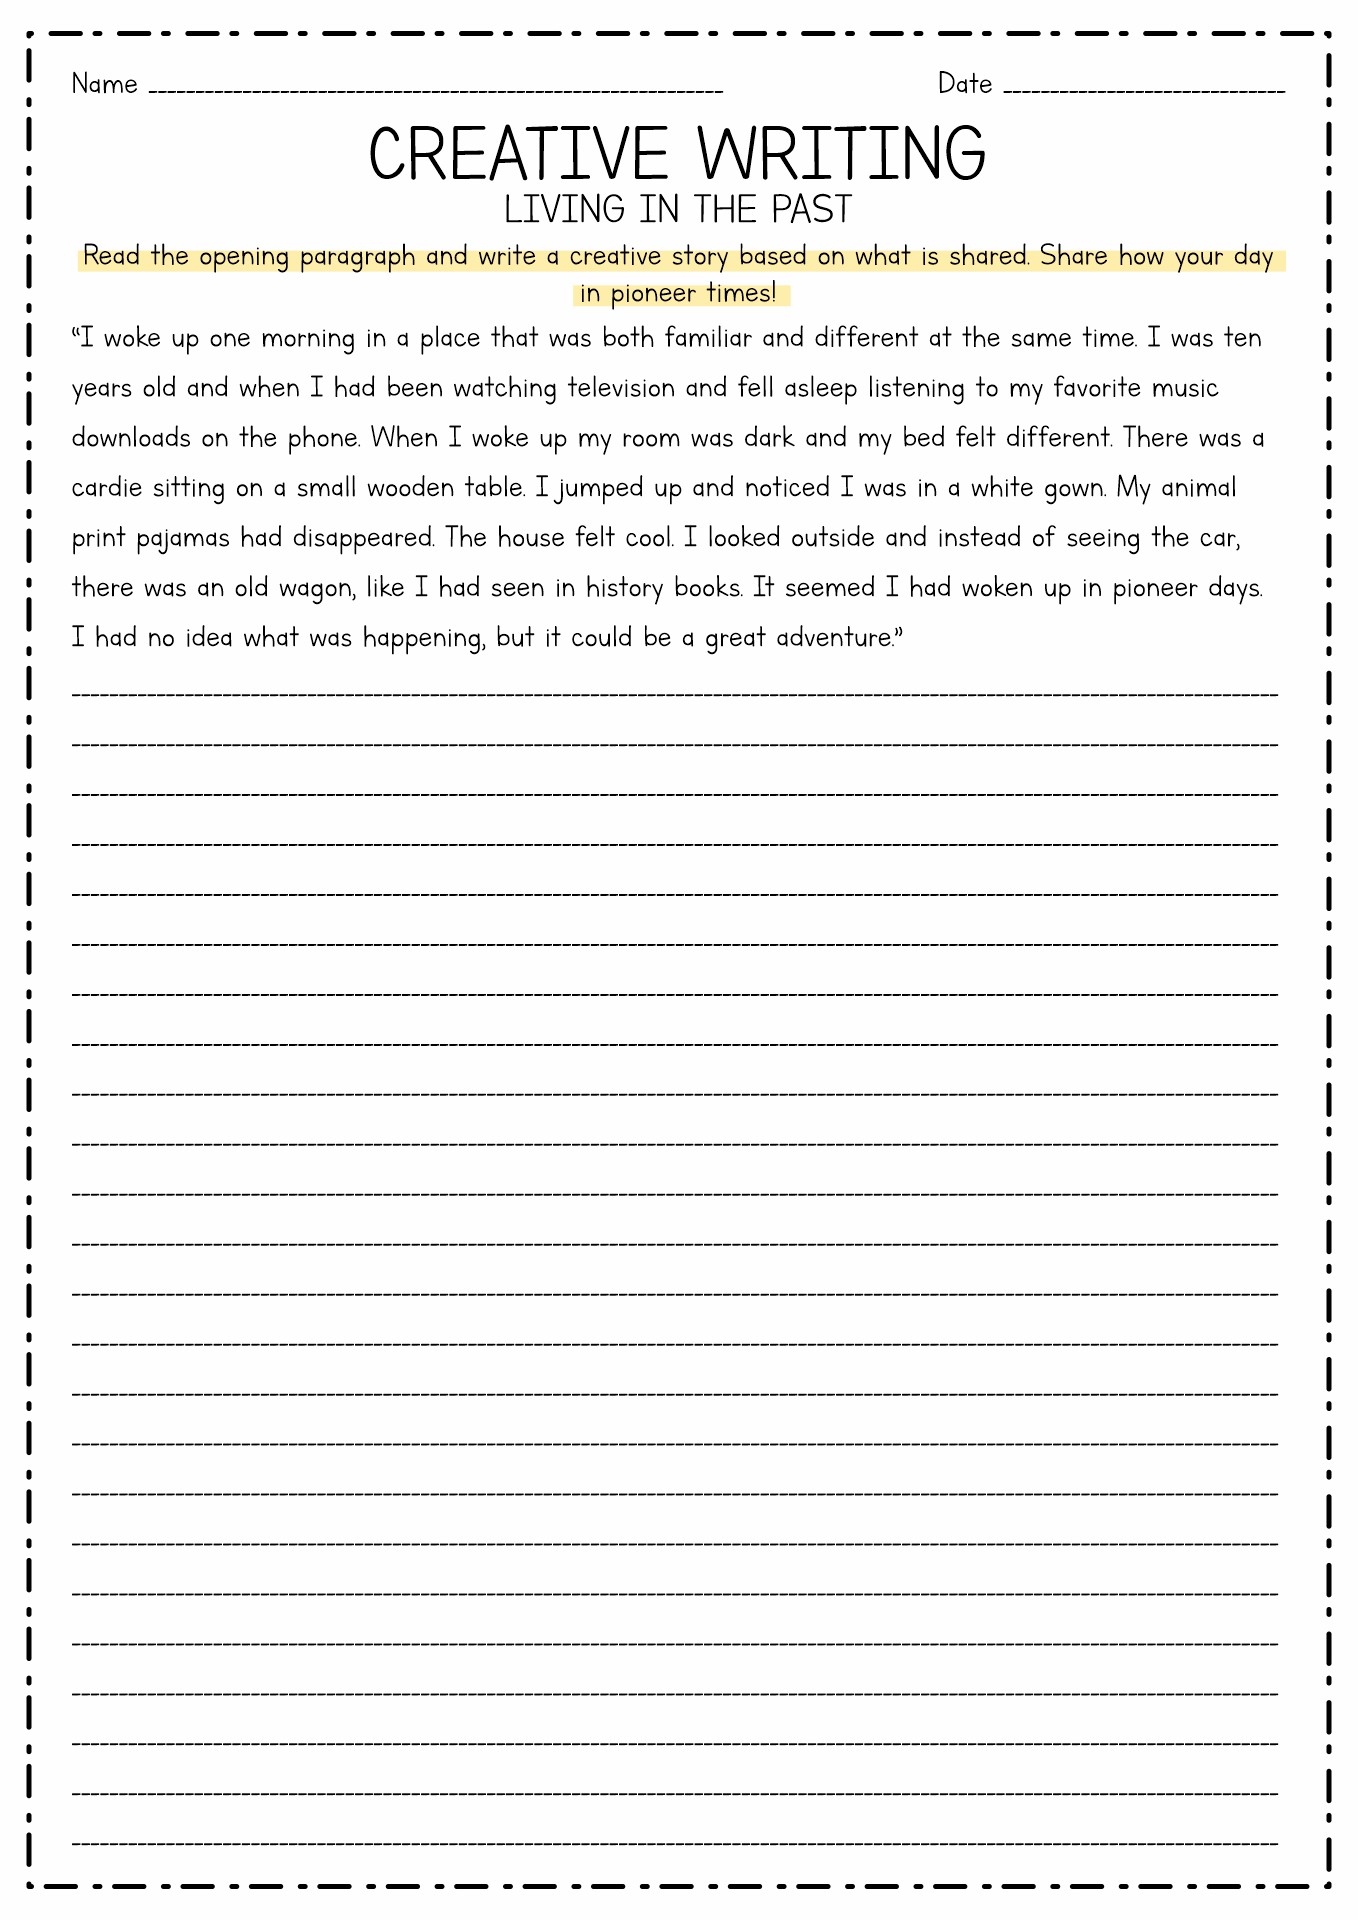 18 Best Images of 4th Grade Essay Writing Worksheets ...